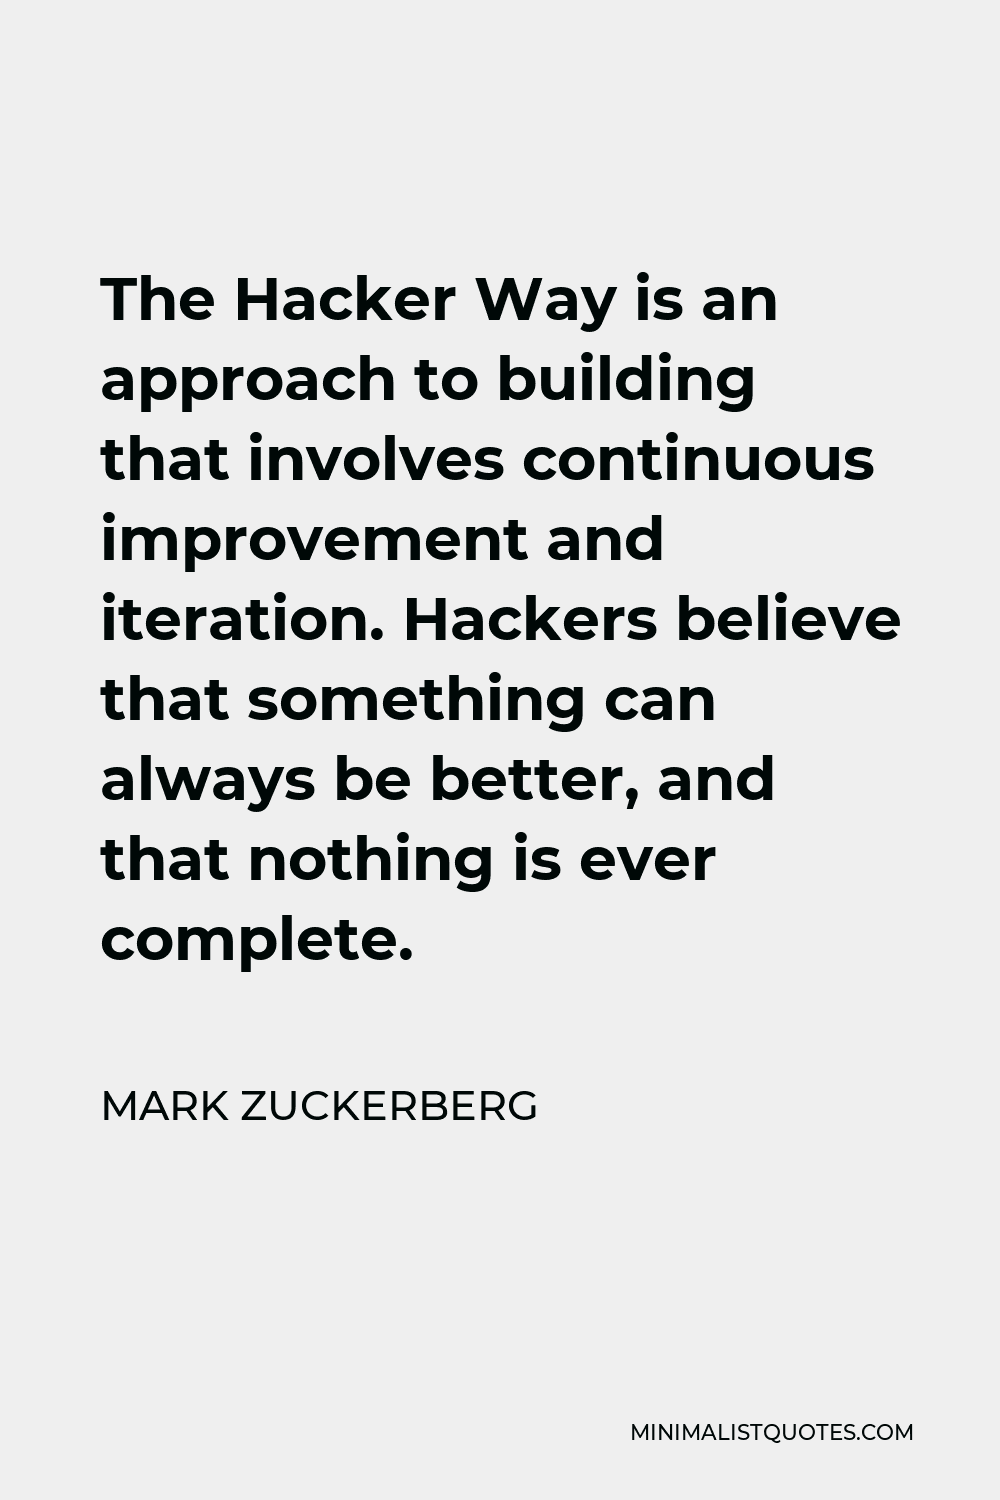 Mark Zuckerberg Quote - The Hacker Way is an approach to building that involves continuous improvement and iteration. Hackers believe that something can always be better, and that nothing is ever complete.